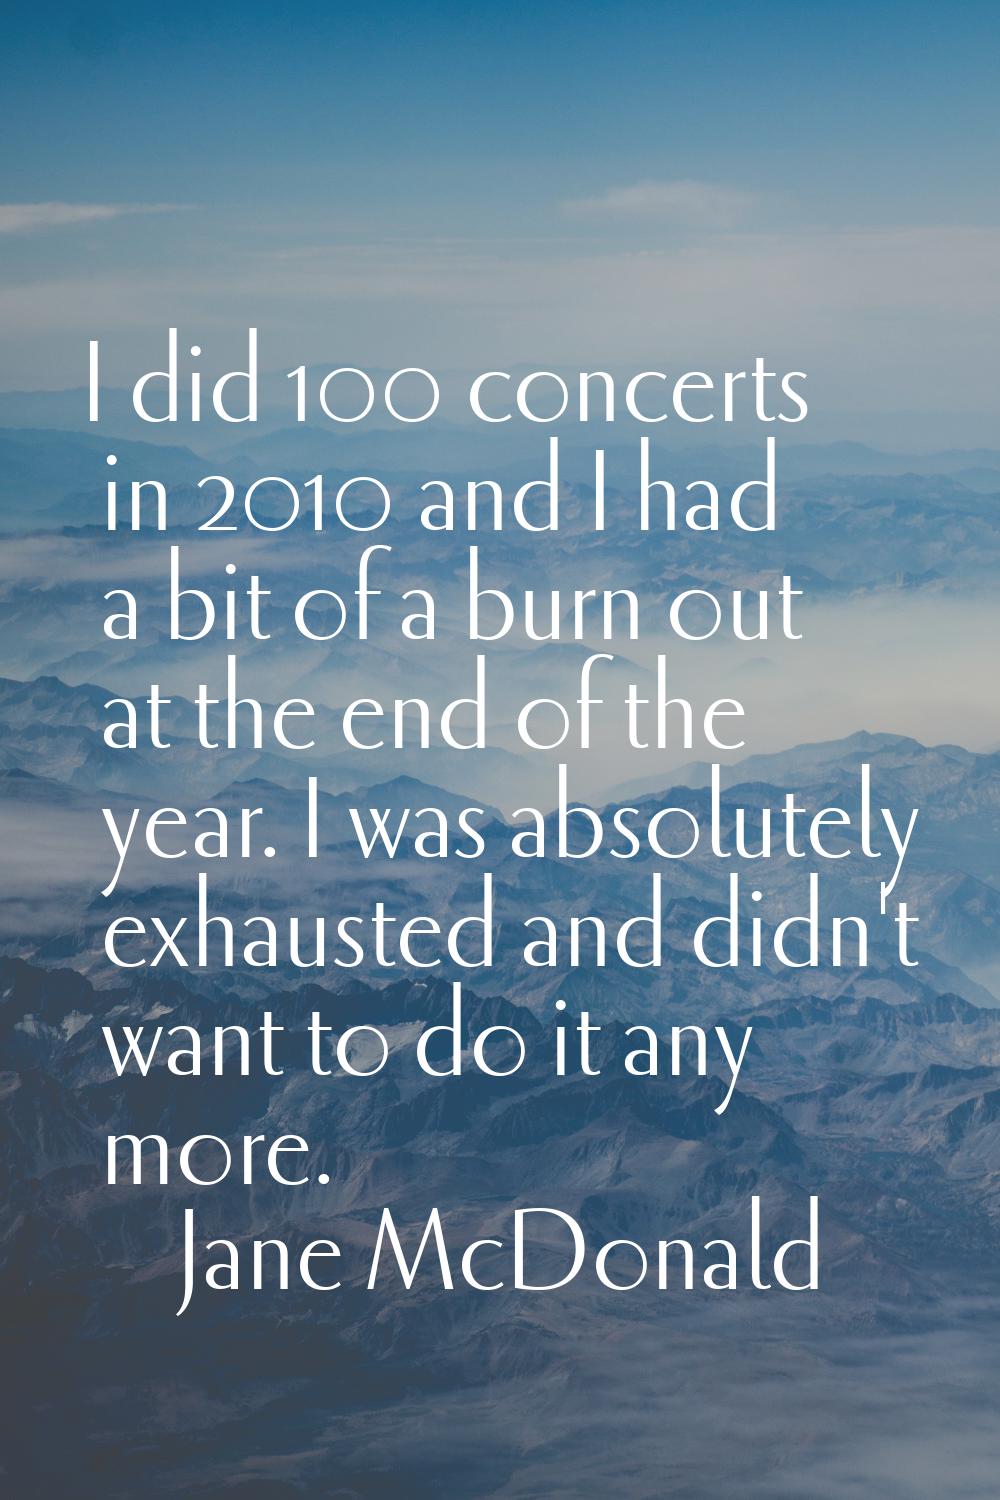 I did 100 concerts in 2010 and I had a bit of a burn out at the end of the year. I was absolutely e